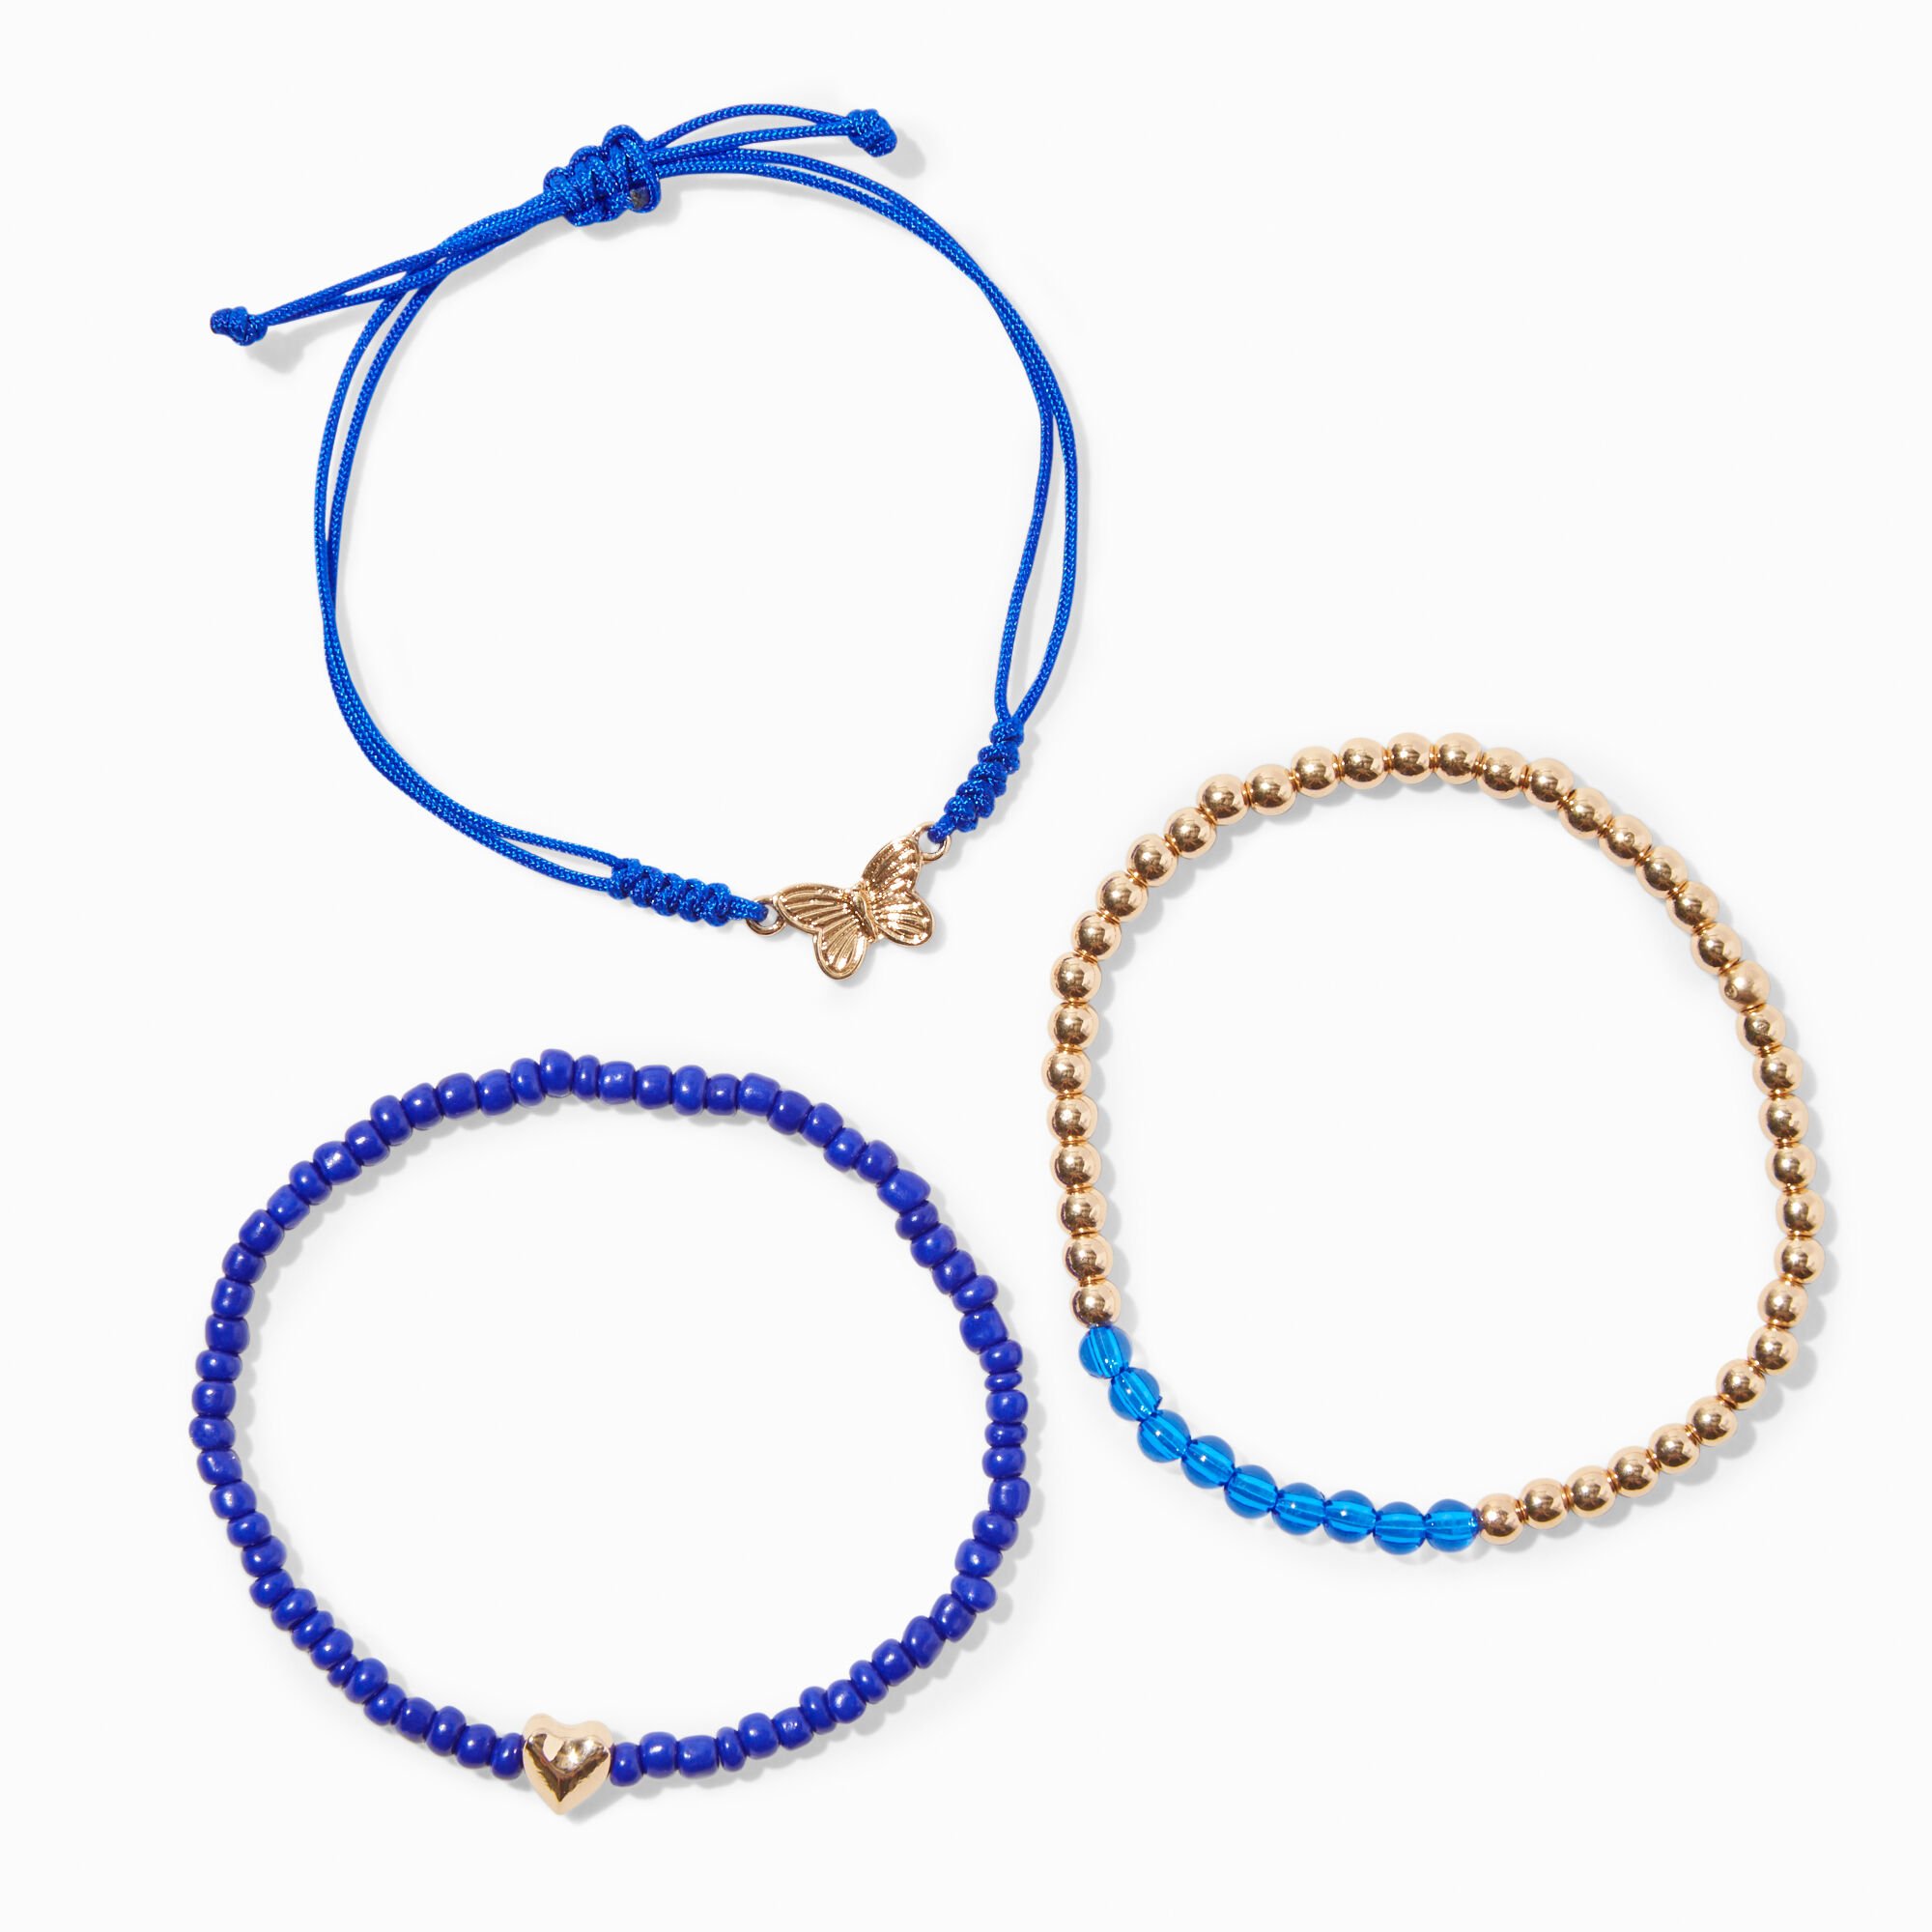 View Claires September Birthstone Beaded Stretch Bracelets 3 Pack Blue information